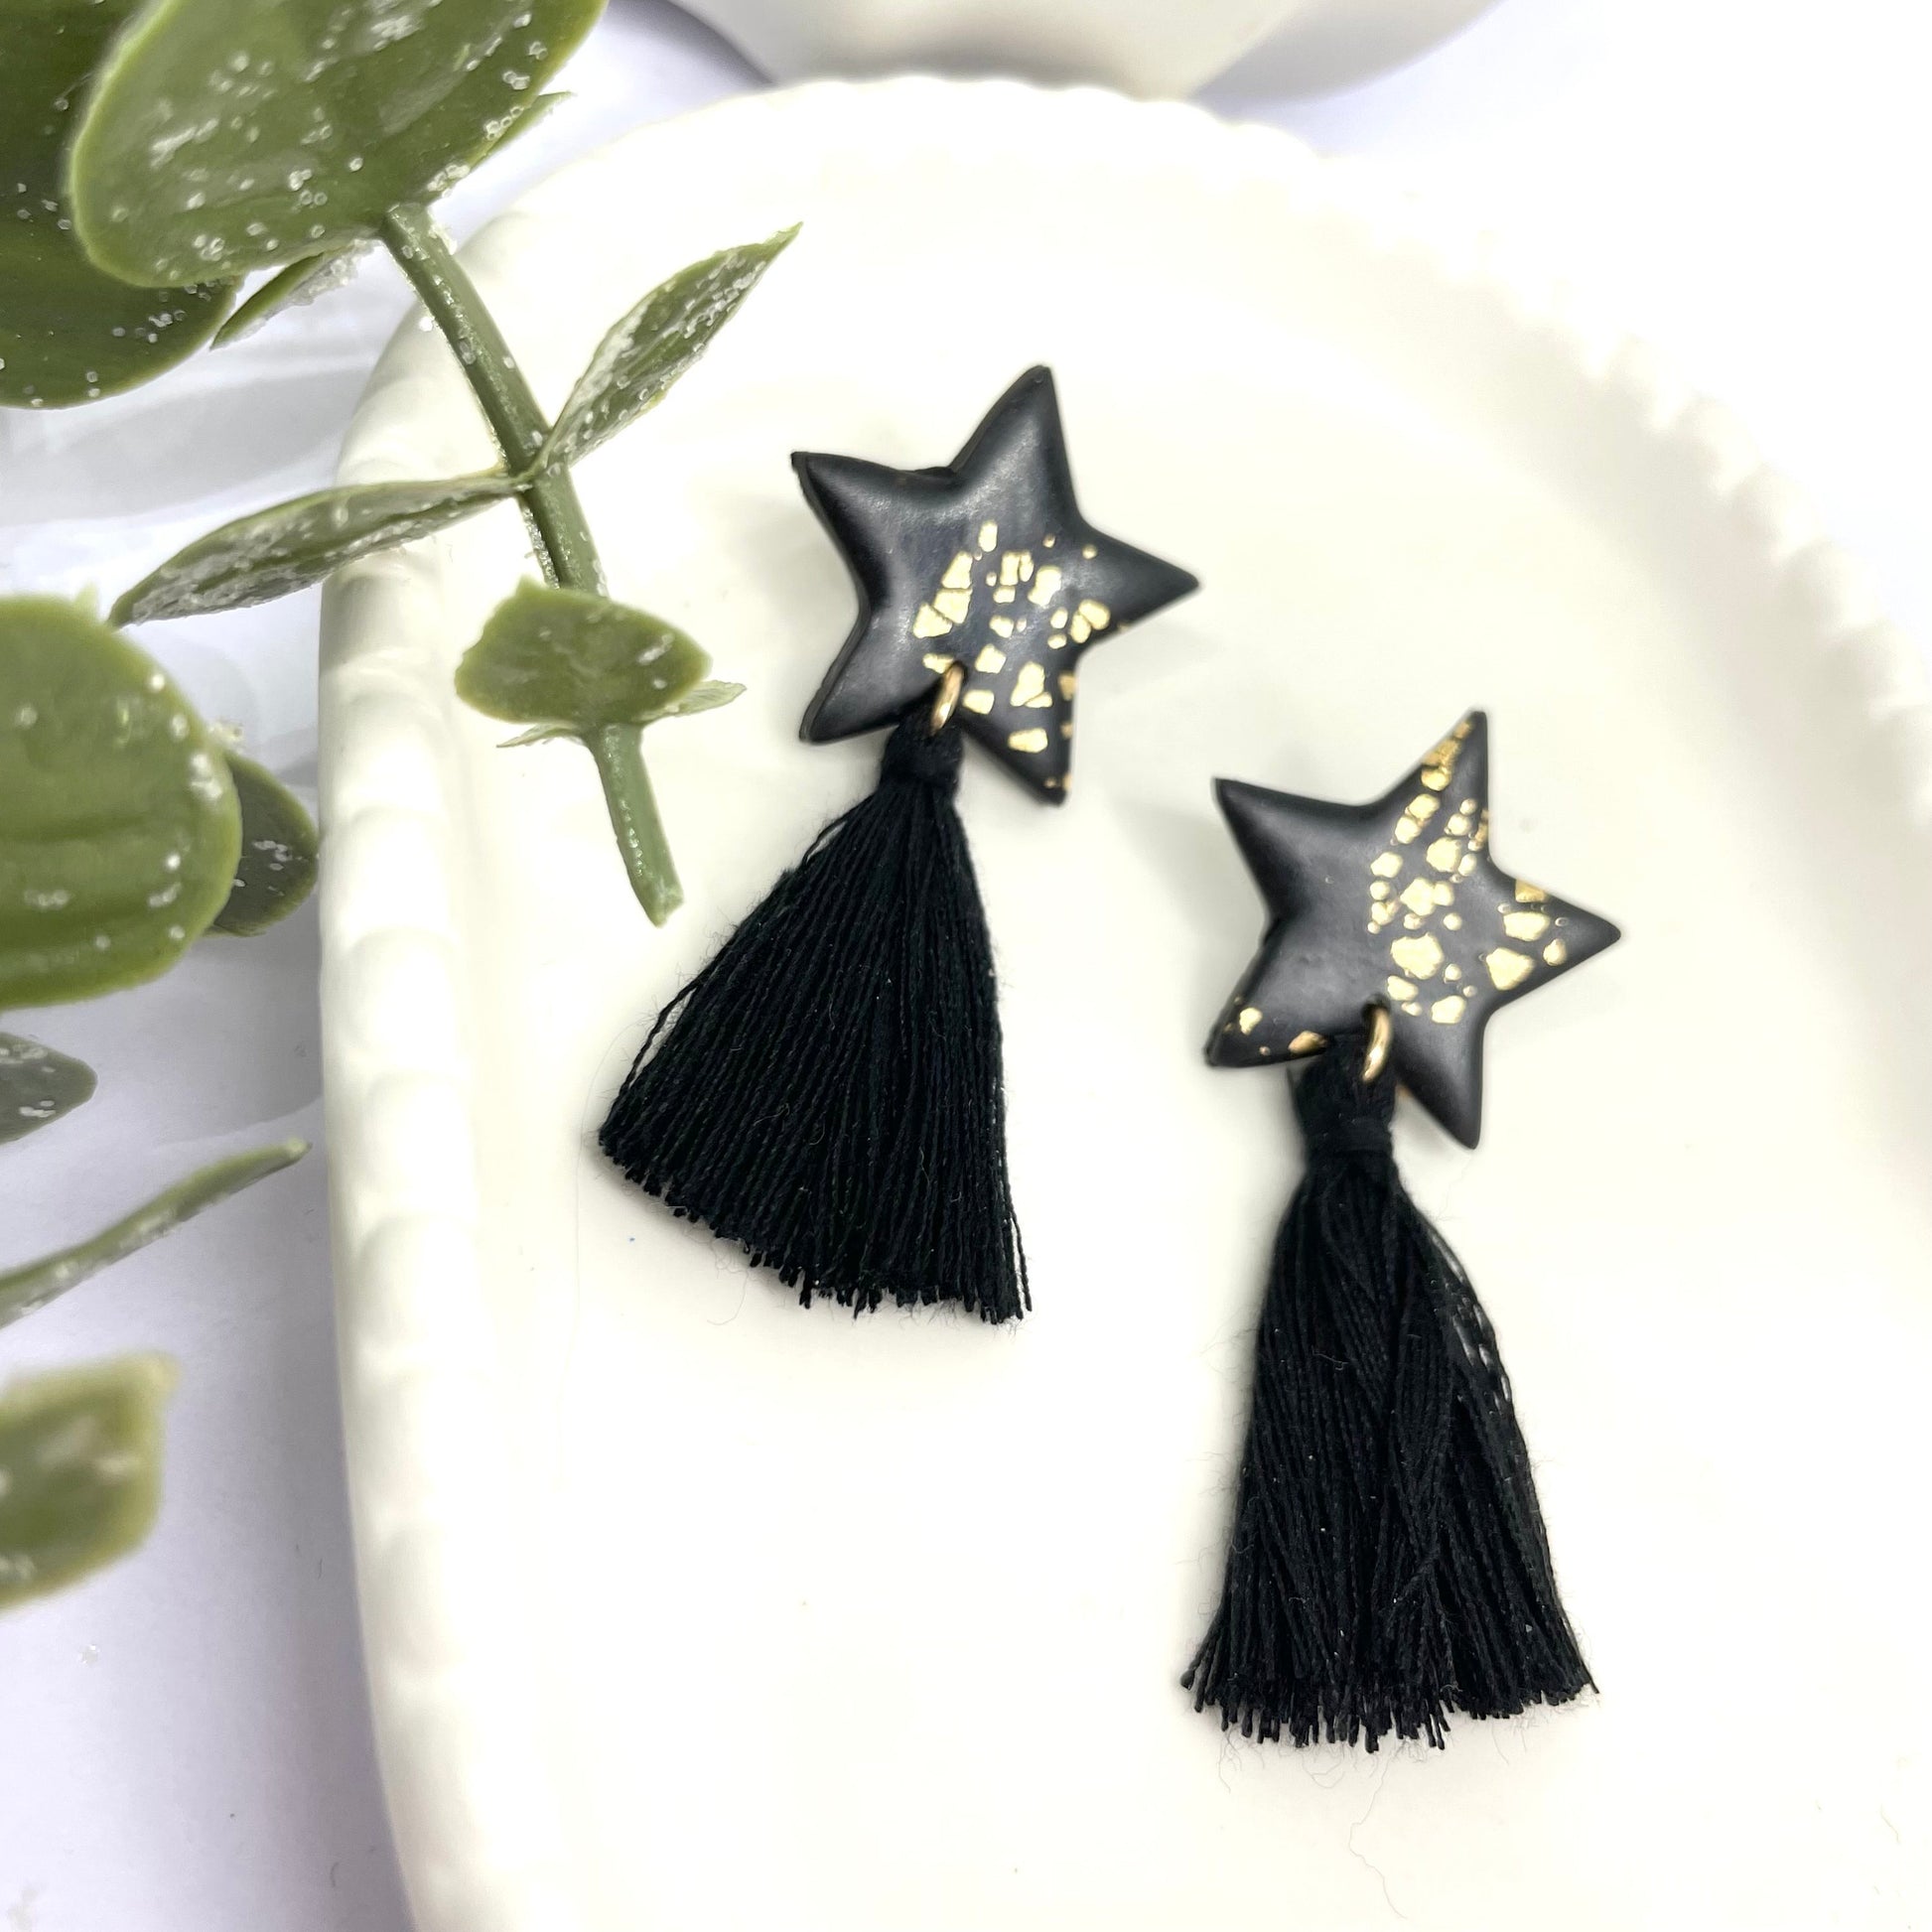 Gorgeous star tassel polymer clay earrings, party earrings, New Year’s Eve sparkly earrings, birthday gift, girlfriend gift, daughter gift